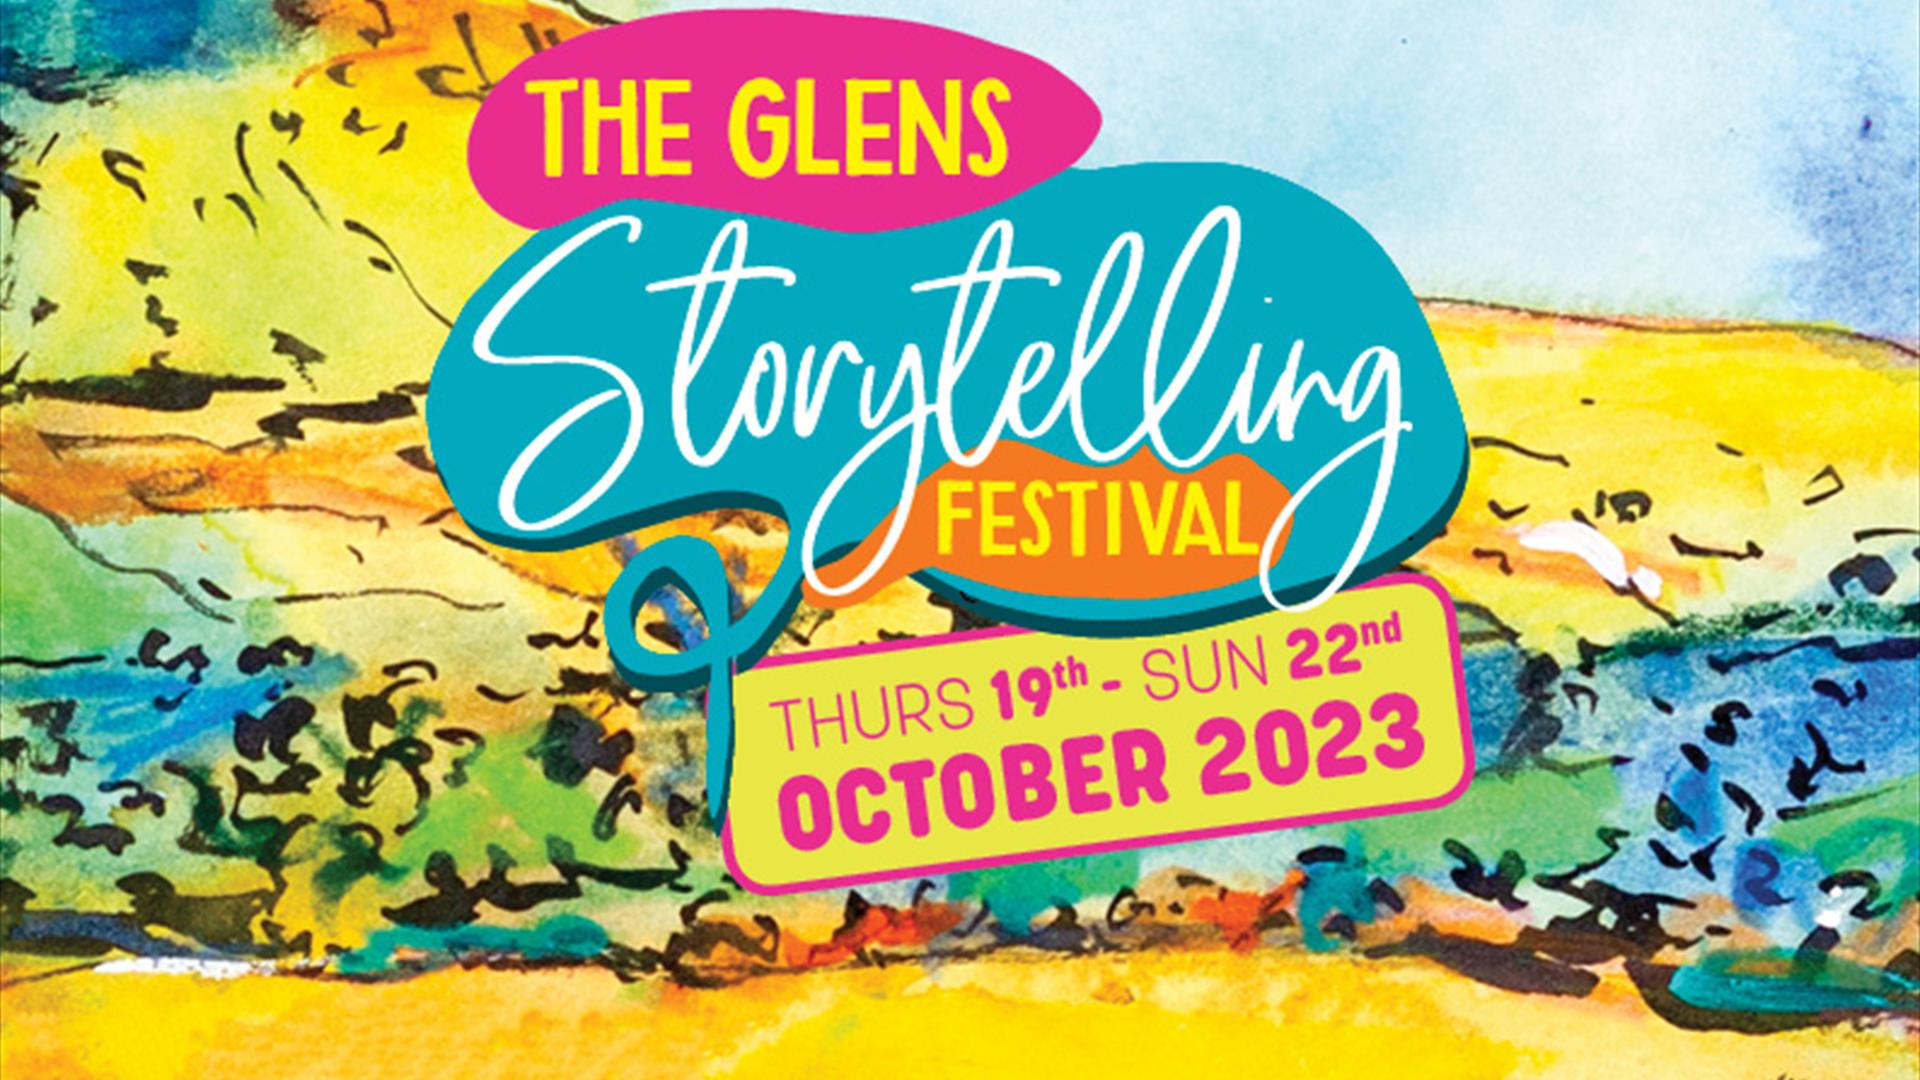 Image shows a painting of the Glens of Antrim with the text 'The Glens Storytelling Festival'